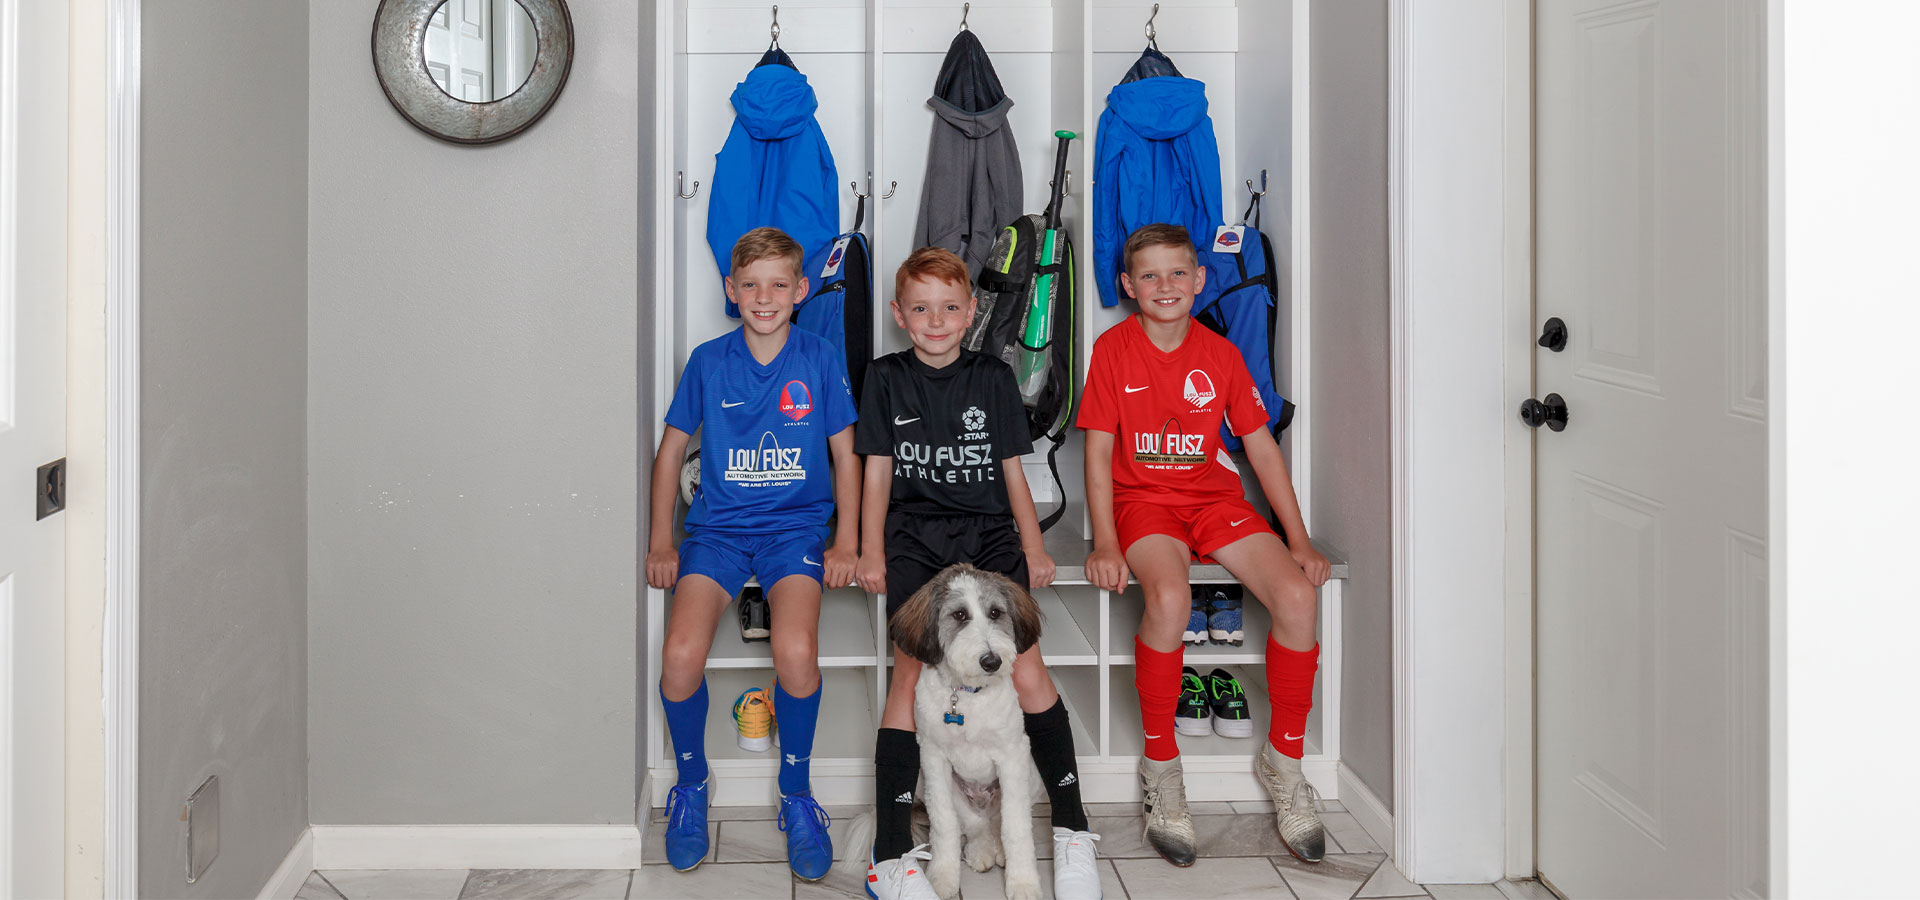 Mudroom lockers with children in soccer jerseys sitting on the bench